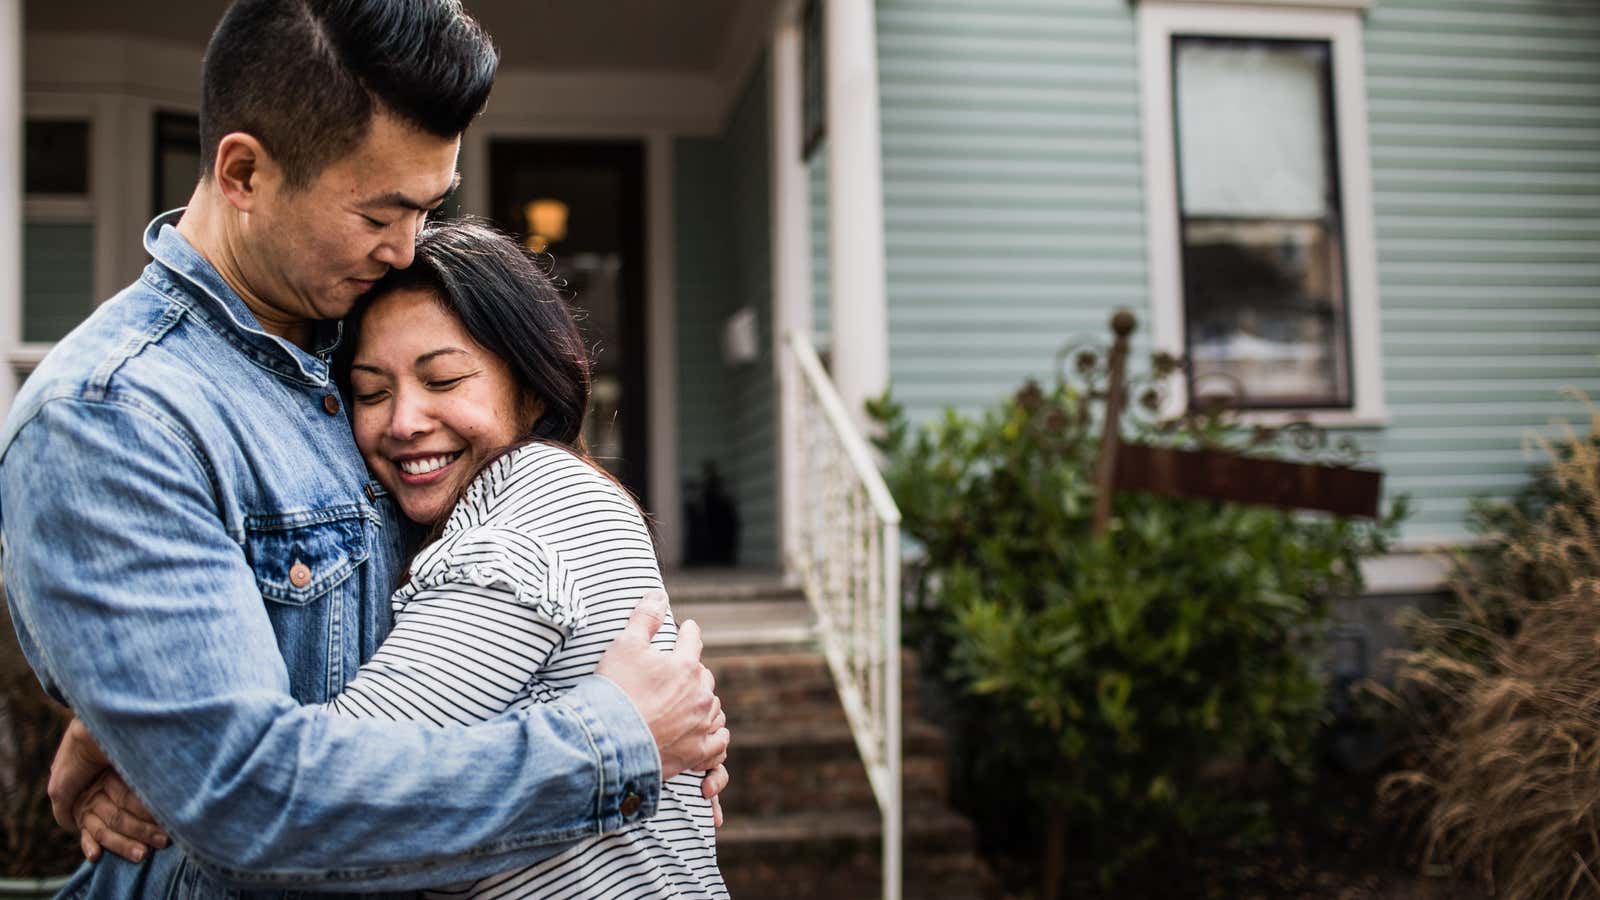 Millennials show all signs of following past generations’ home buying path, just a bit delayed